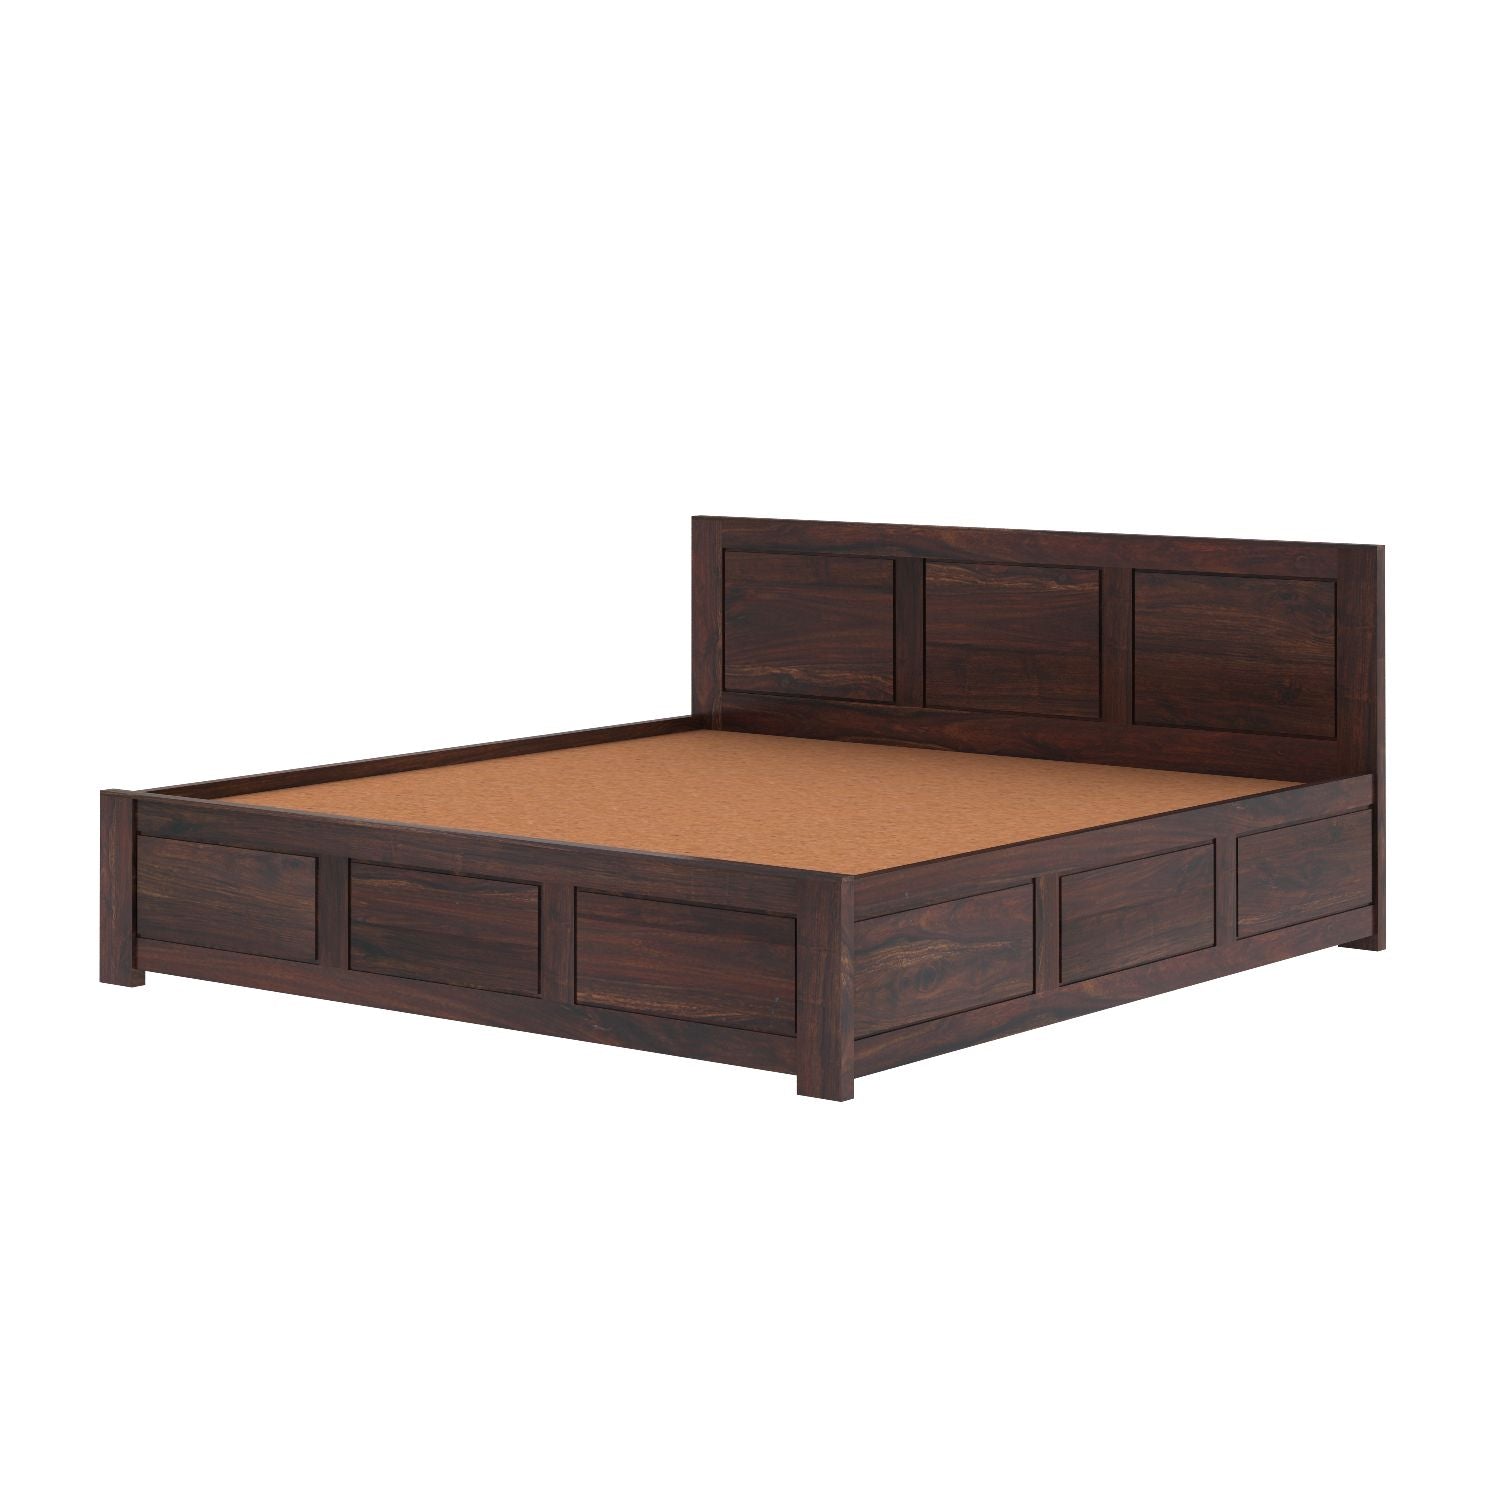 Woodwing Solid Sheesham Wood Hydraulic Bed With Box Storage (Queen Size, Walnut Finish)